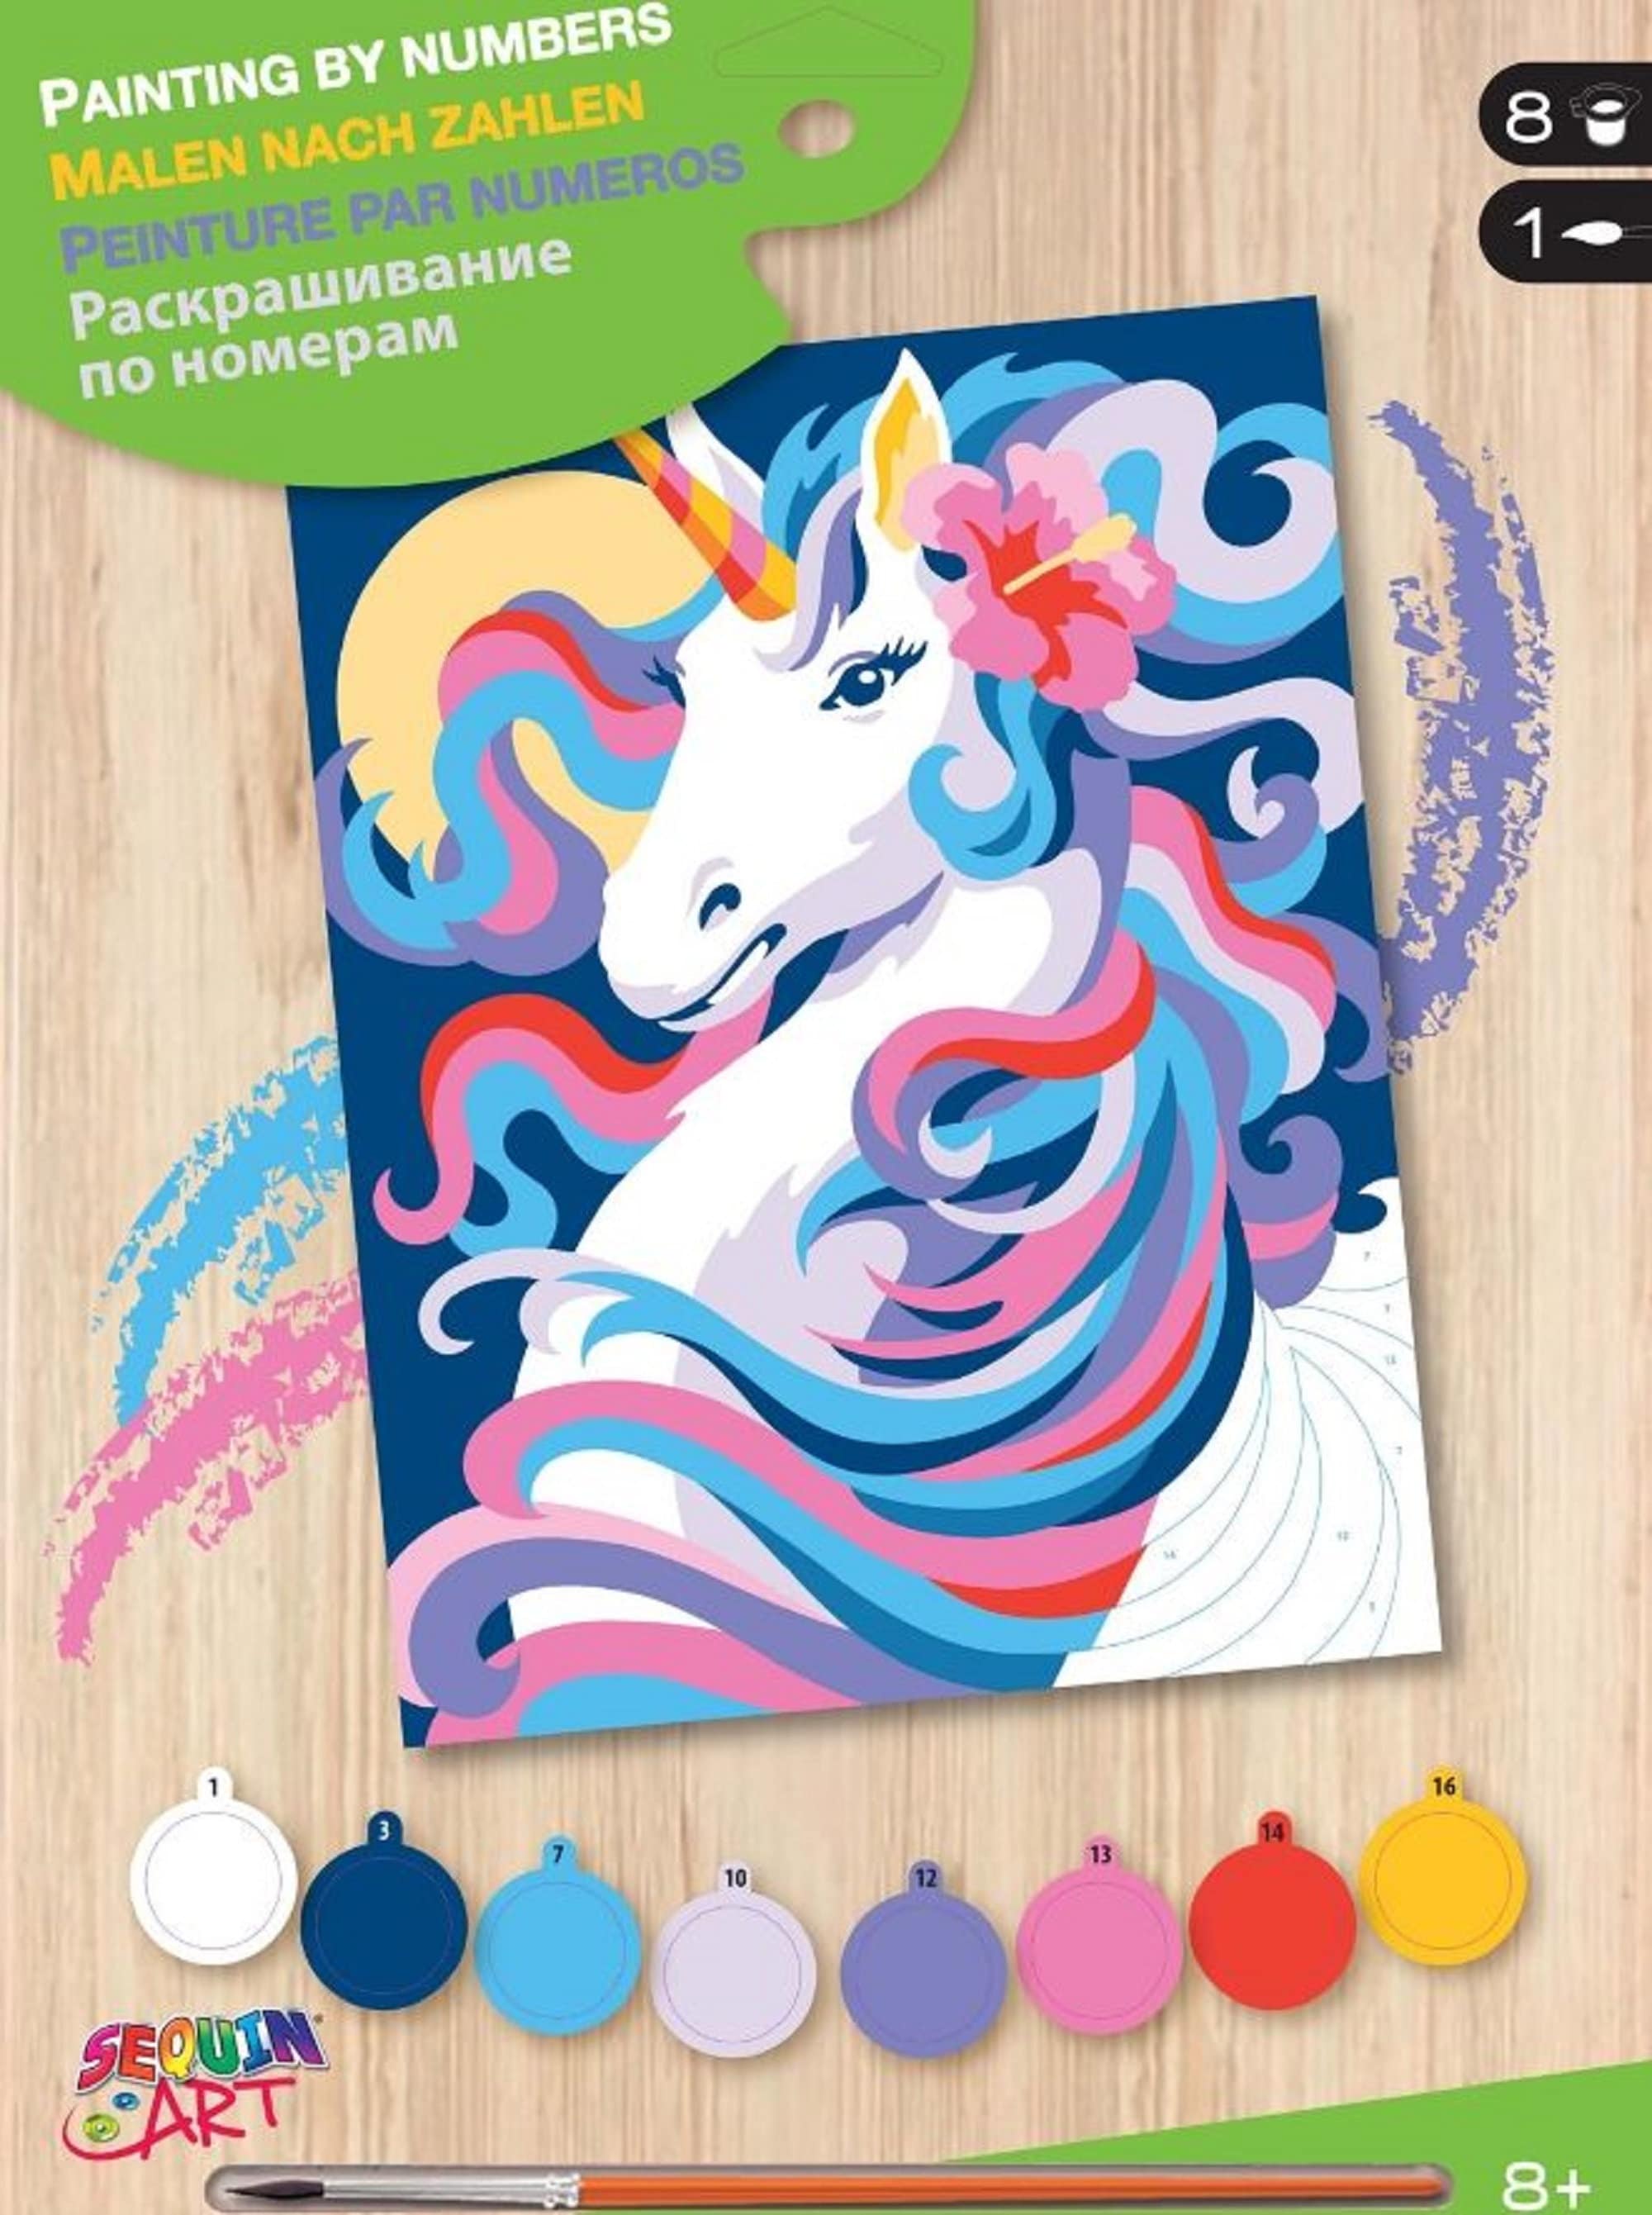 Paint By Number Kits – JourniCanvas